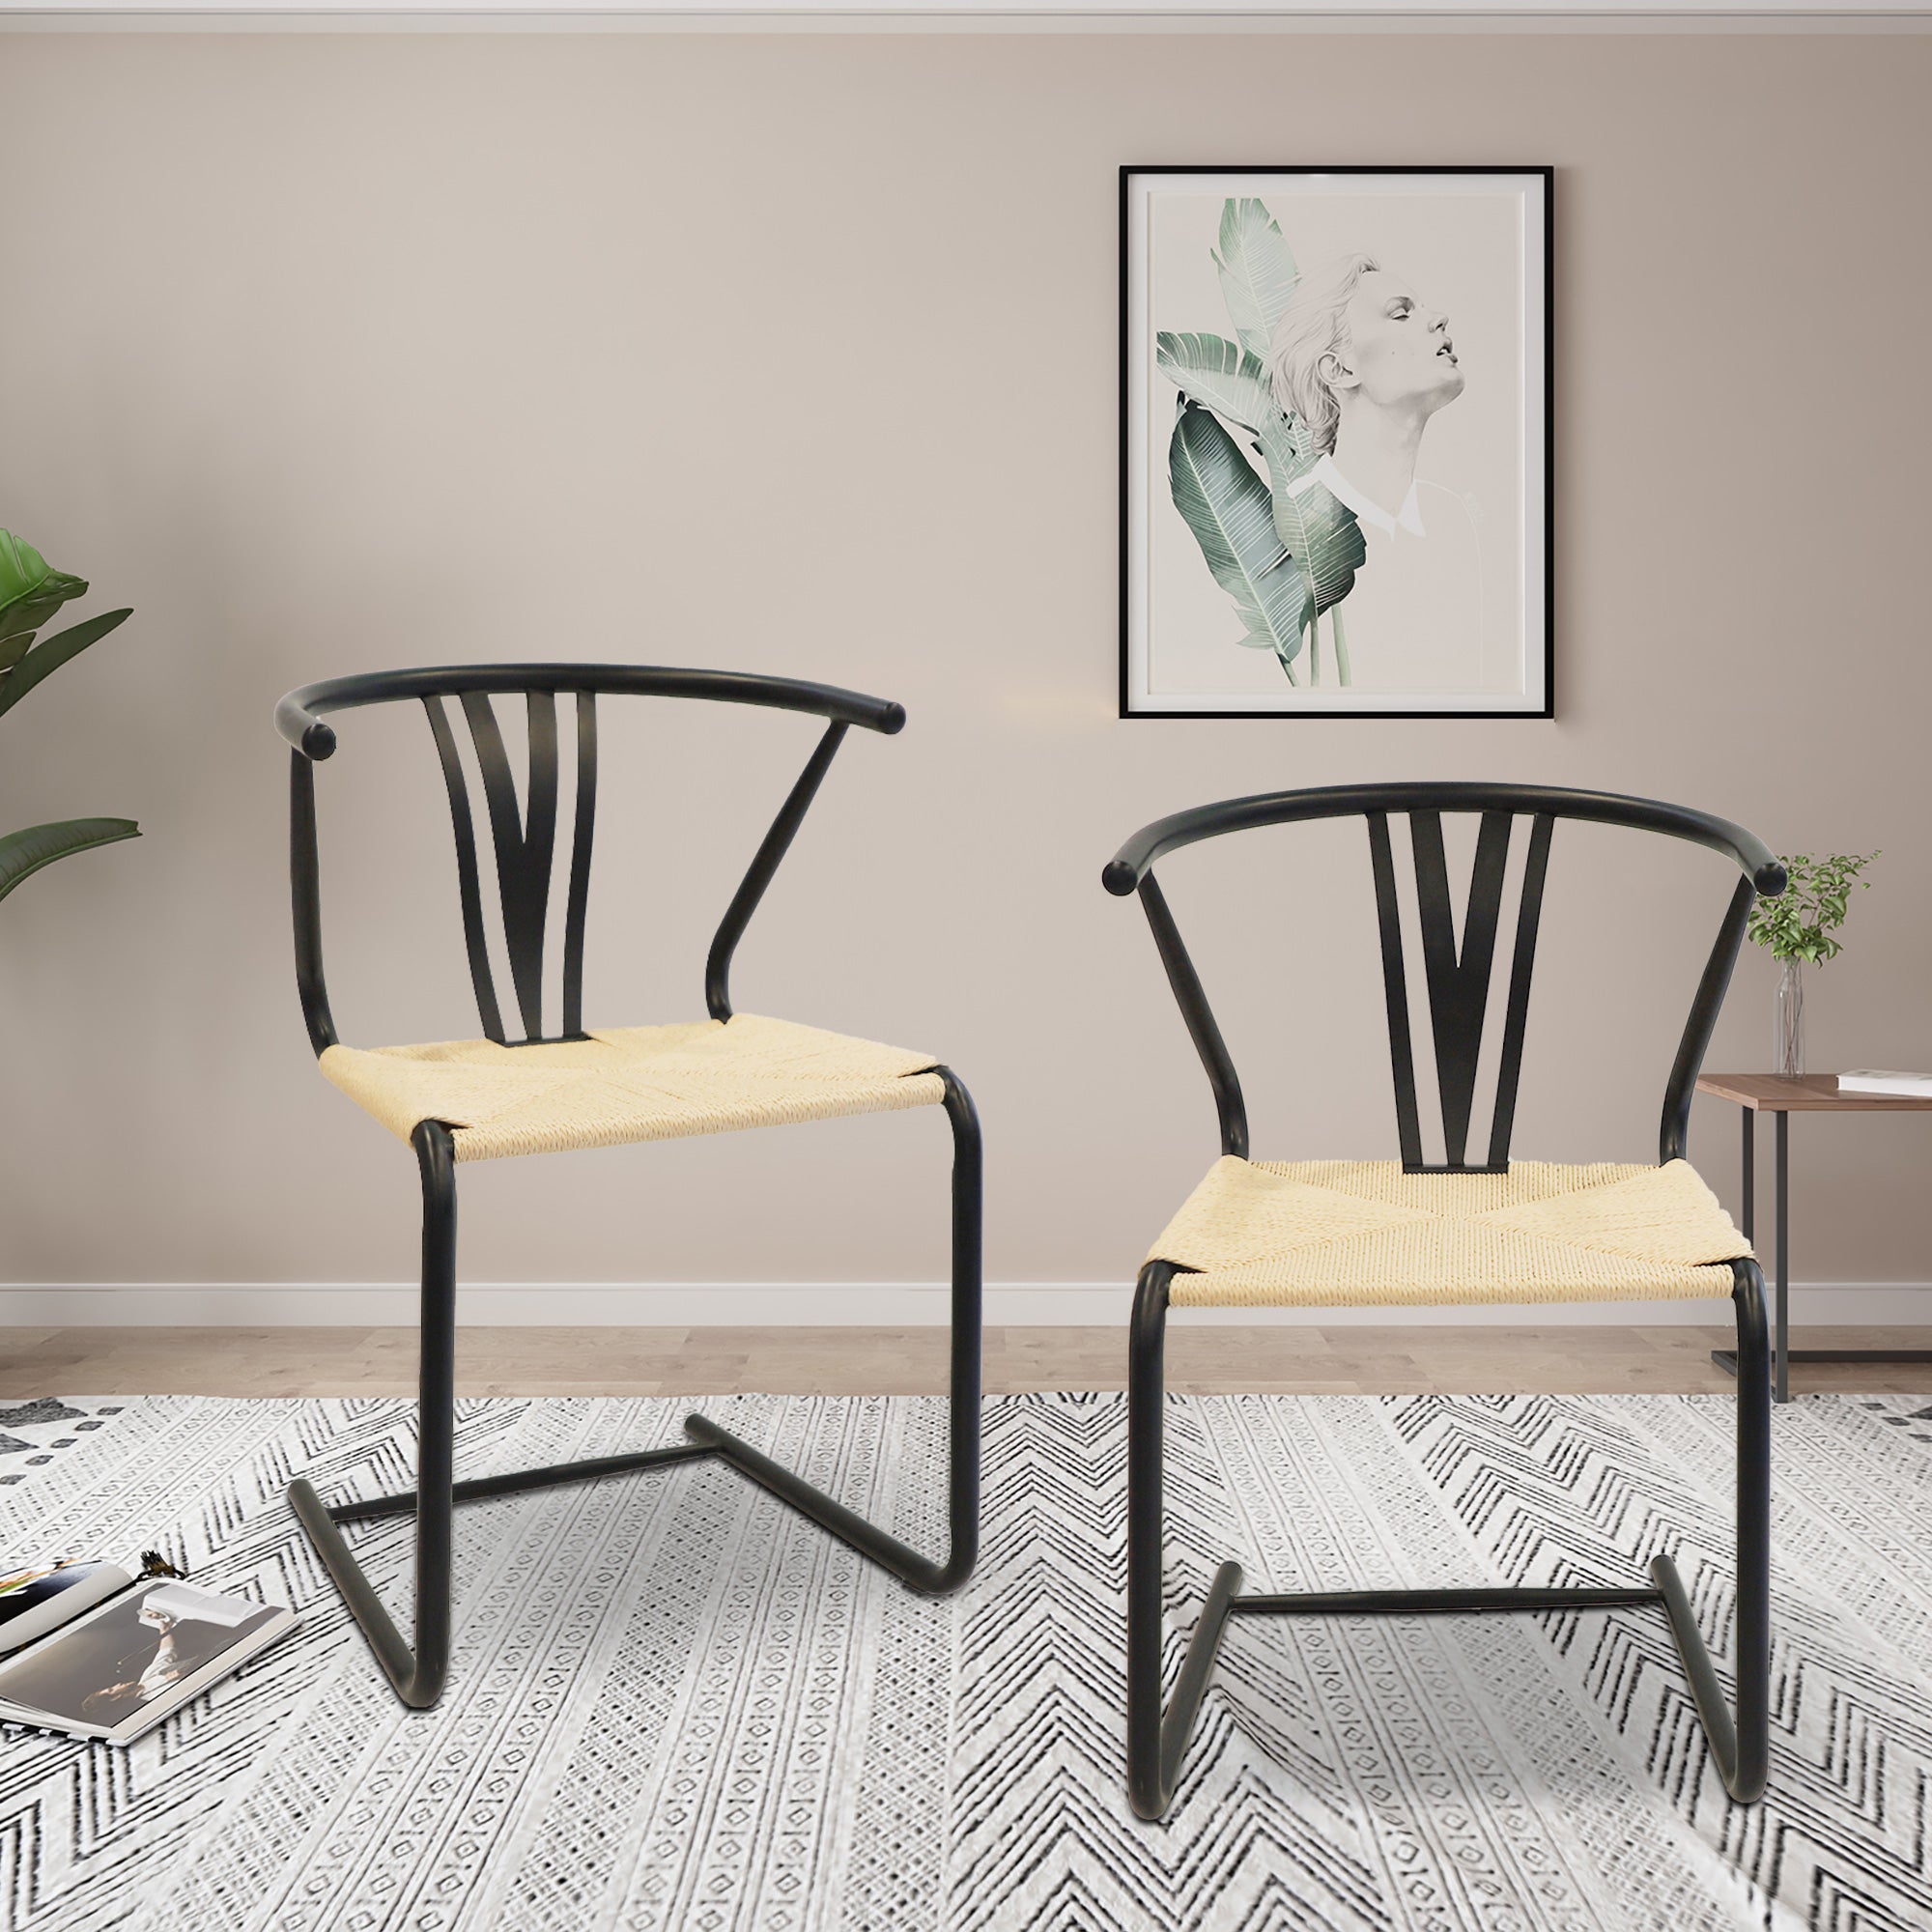 Black Wishbone Dining Chair Set of 2 Hand-Woven Paper Rattan Chairs